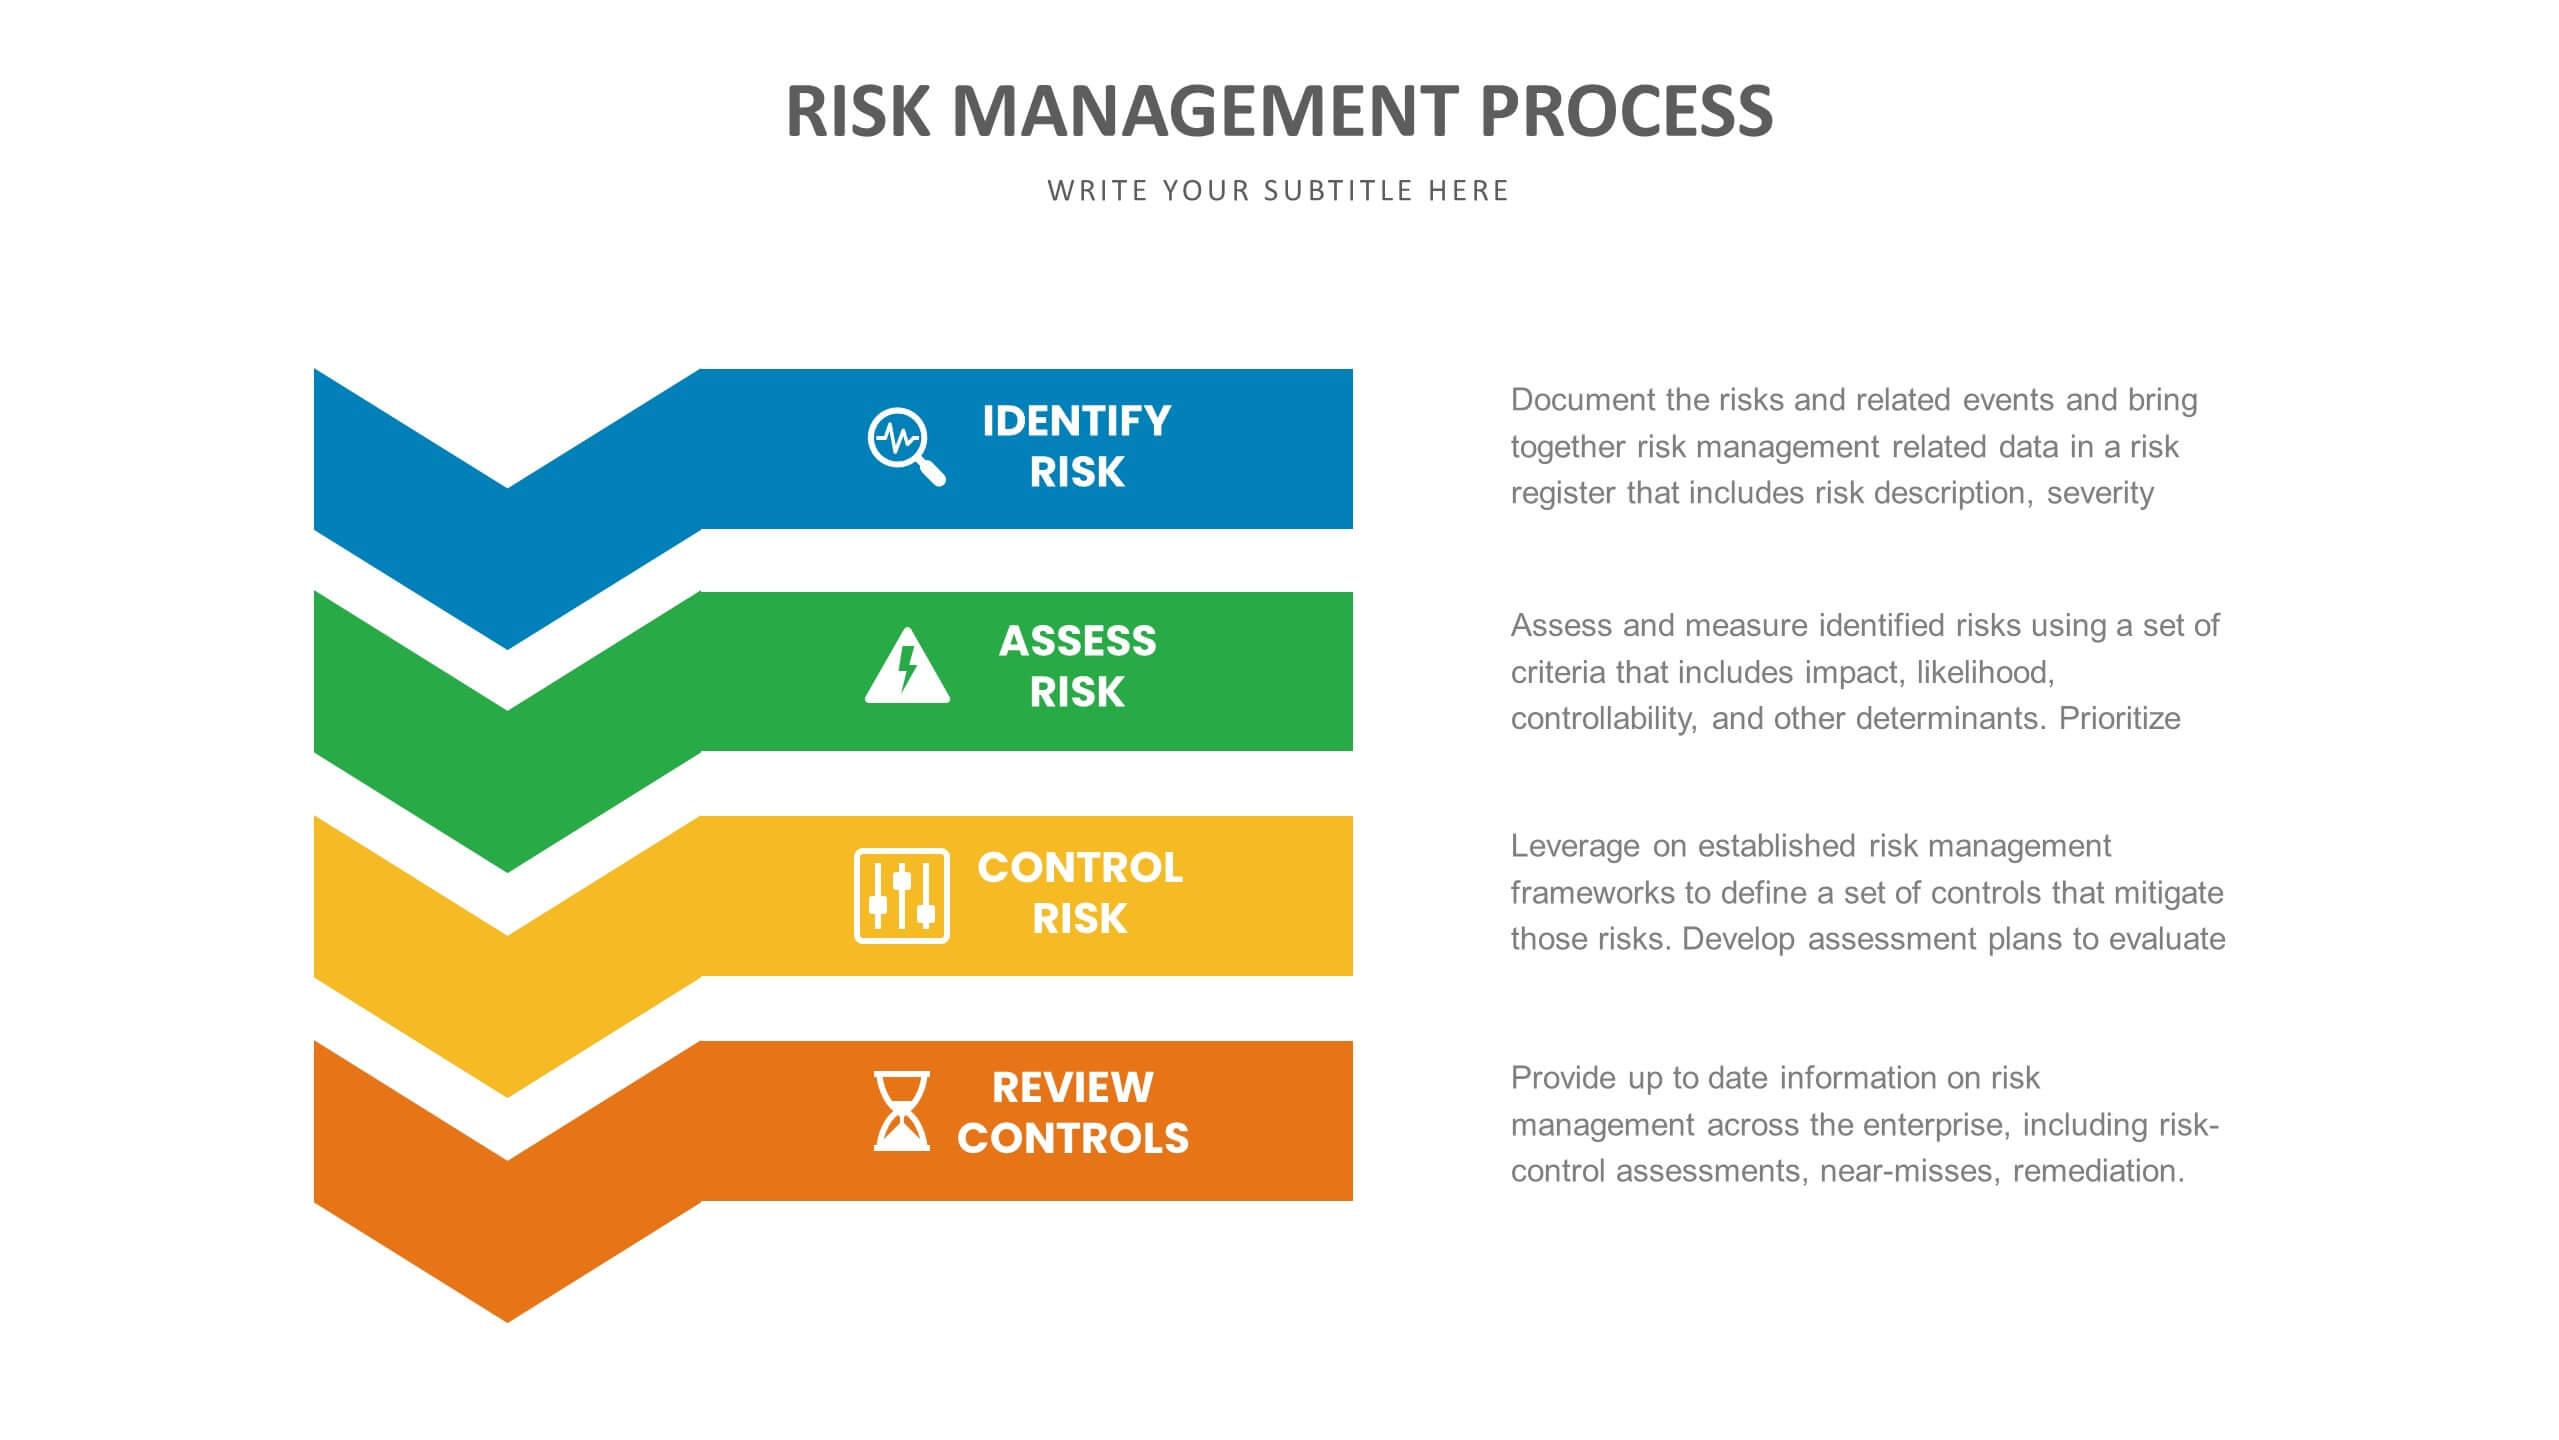 risk management presentation to the board ppt